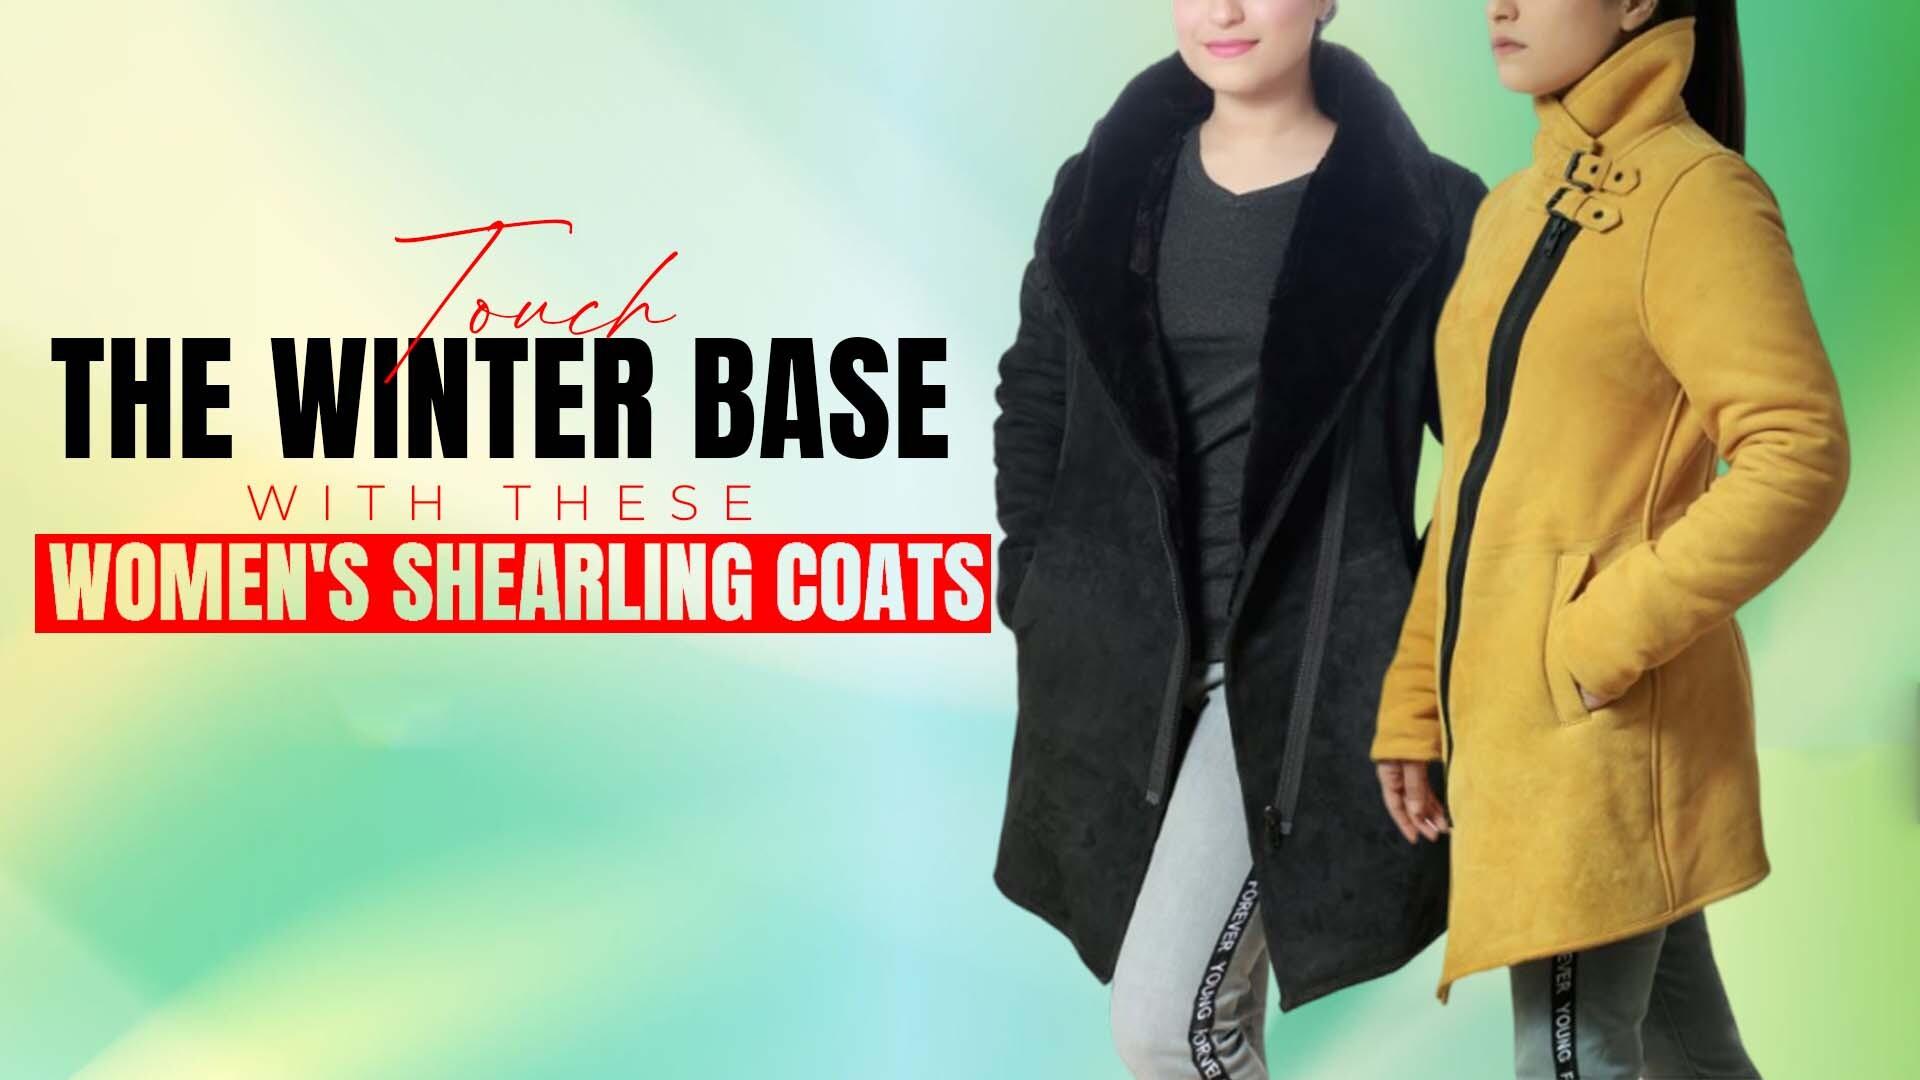 Touch The Winter Base With These Women’s Shearling Coats